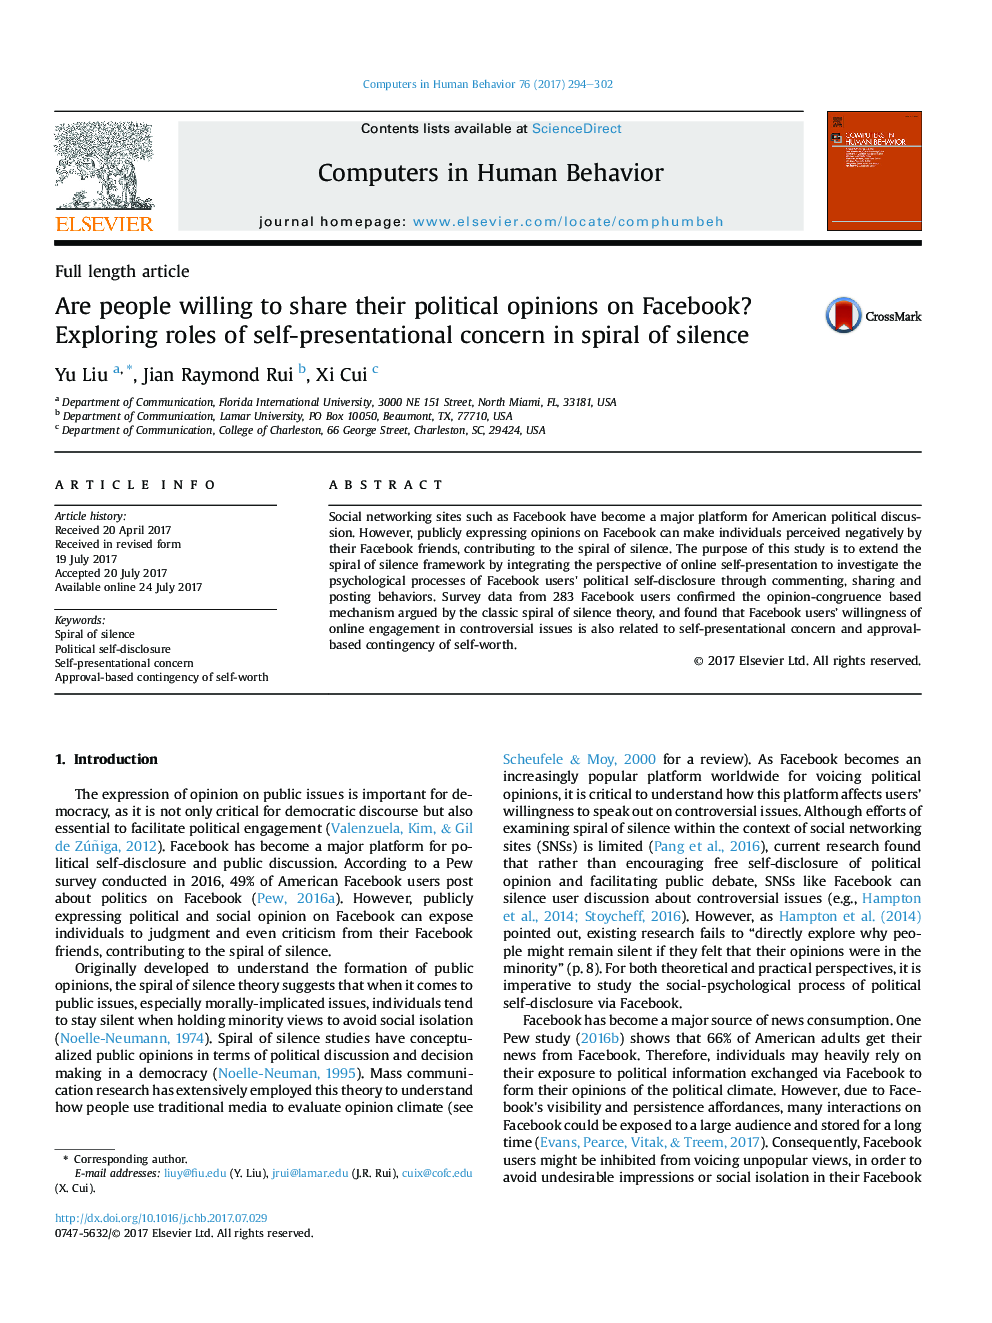 Full length articleAre people willing to share their political opinions on Facebook? Exploring roles of self-presentational concern in spiral of silence